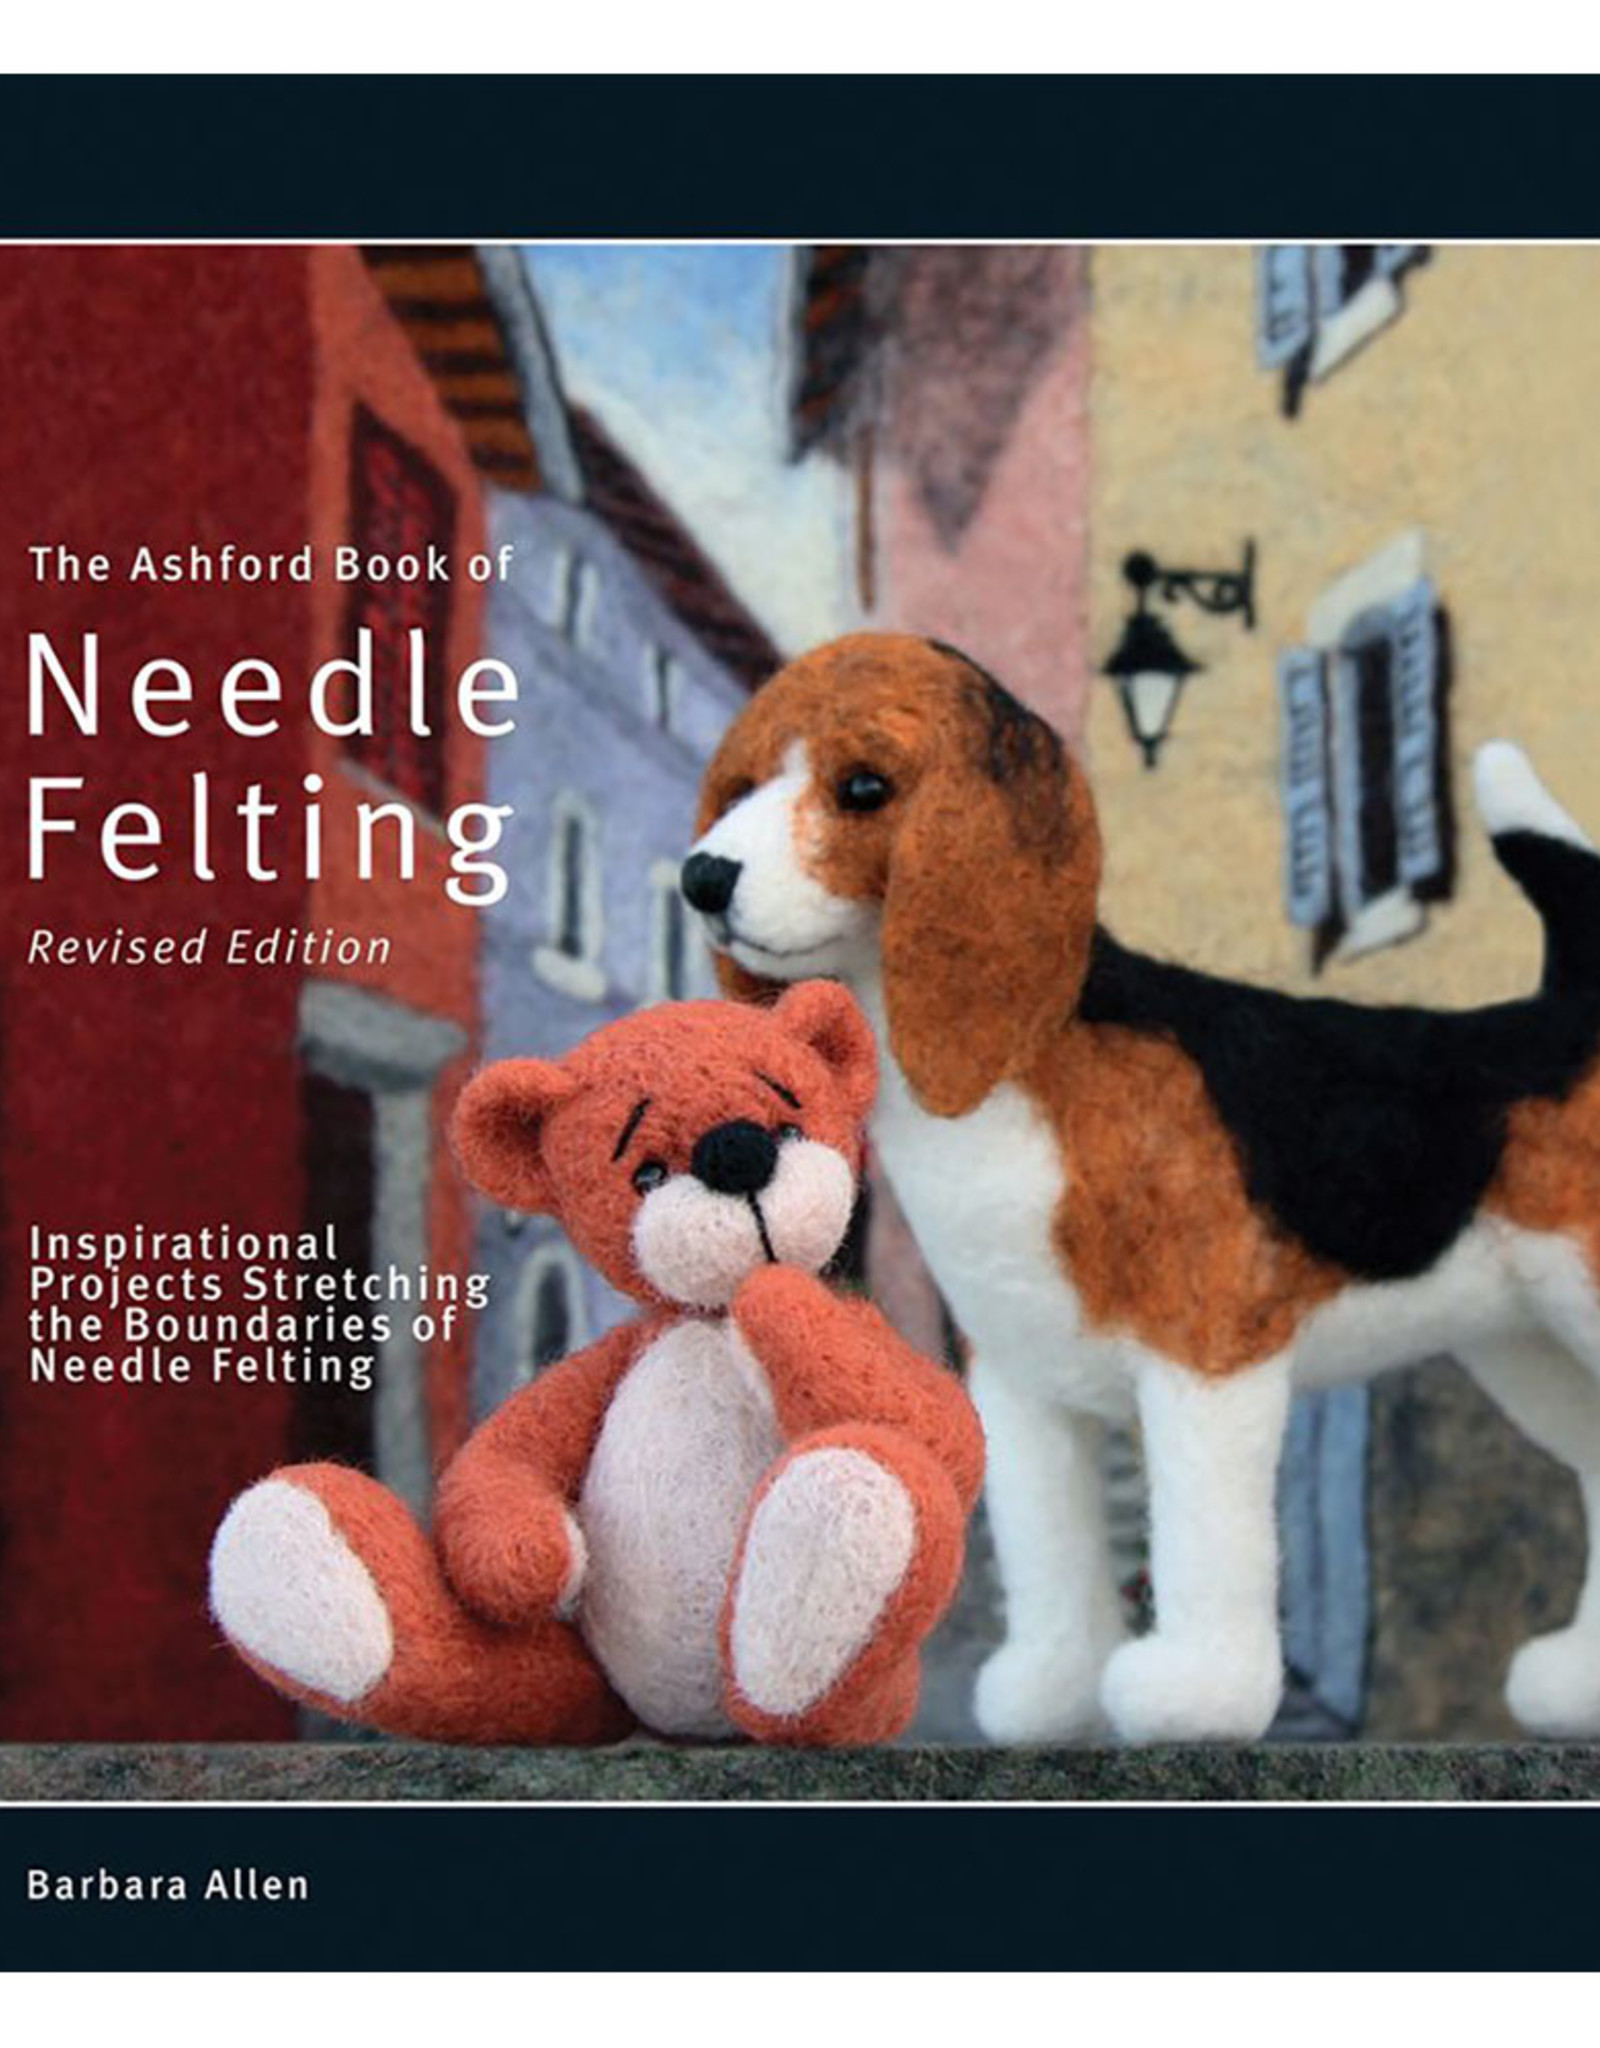 The Ashford Book of Needle Felting: Inspirational Projects Stretching the Boundaries of Needle Felting [Book]